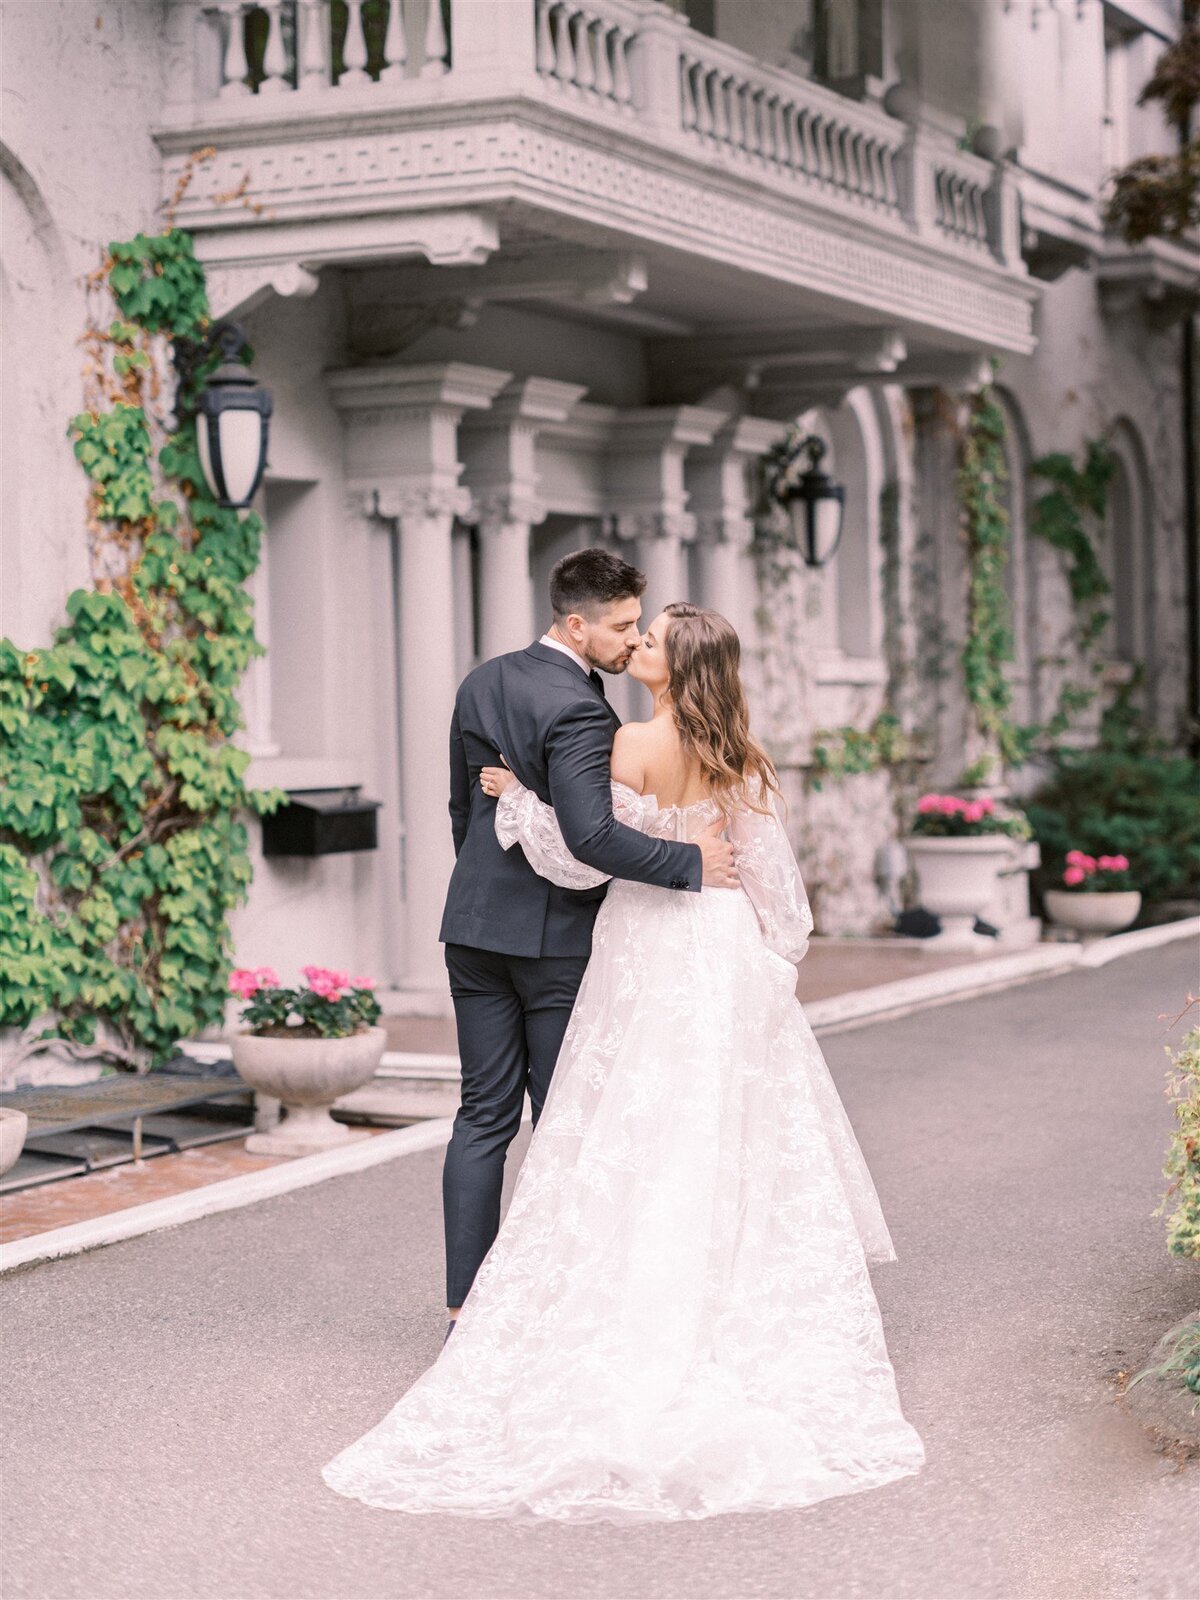 A couple in formal attire, with the woman in a white gown and the man in a dark suit, embrace on a driveway in front of a vine-covered building, showcasing their exquisite wedding design.